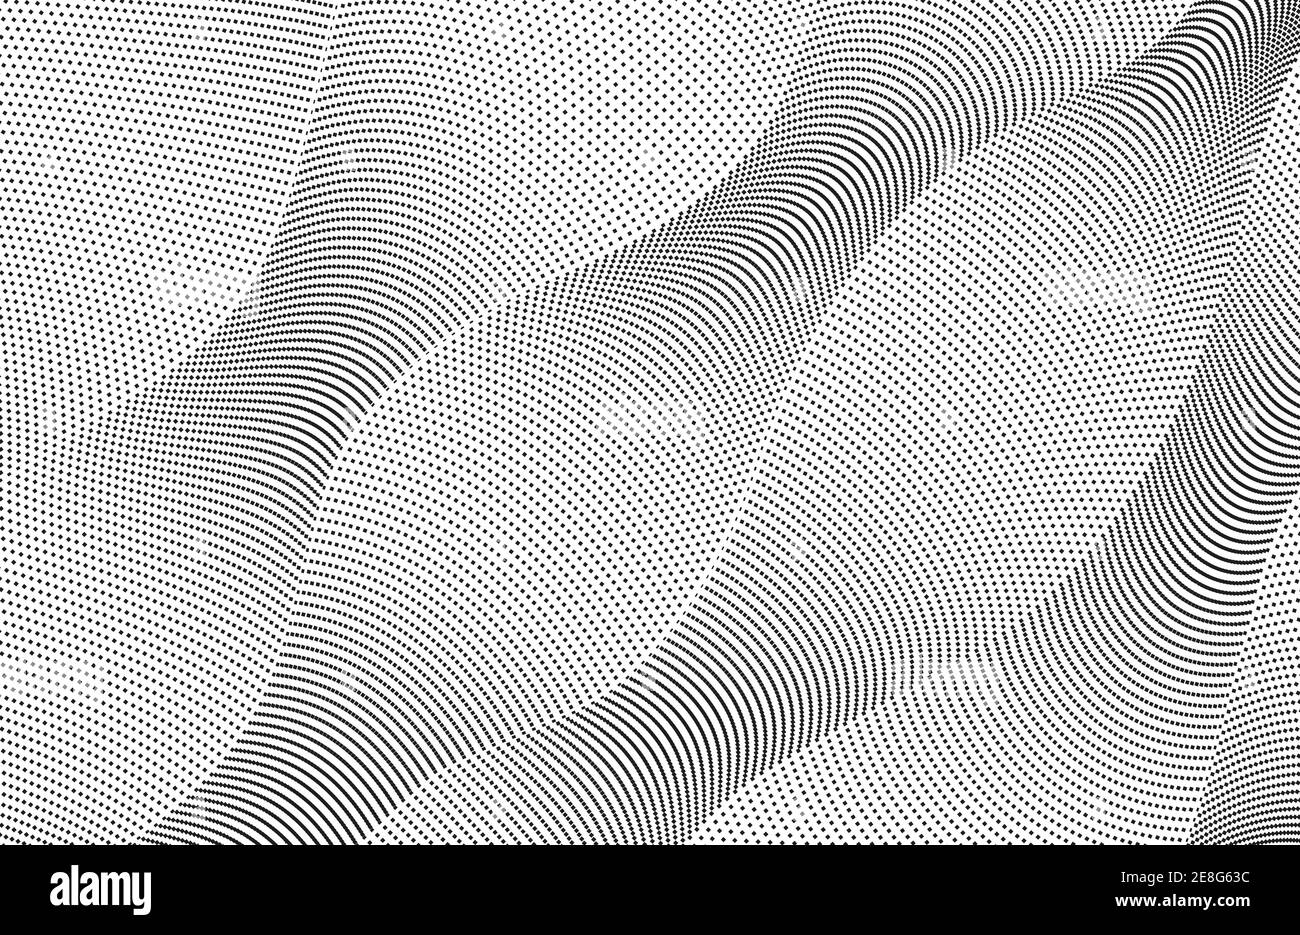 Black dotted diagonal lines. Digital halftone pattern. Abstract technology background. Electromagnetic waves concept. Monochrome vector op art design Stock Vector